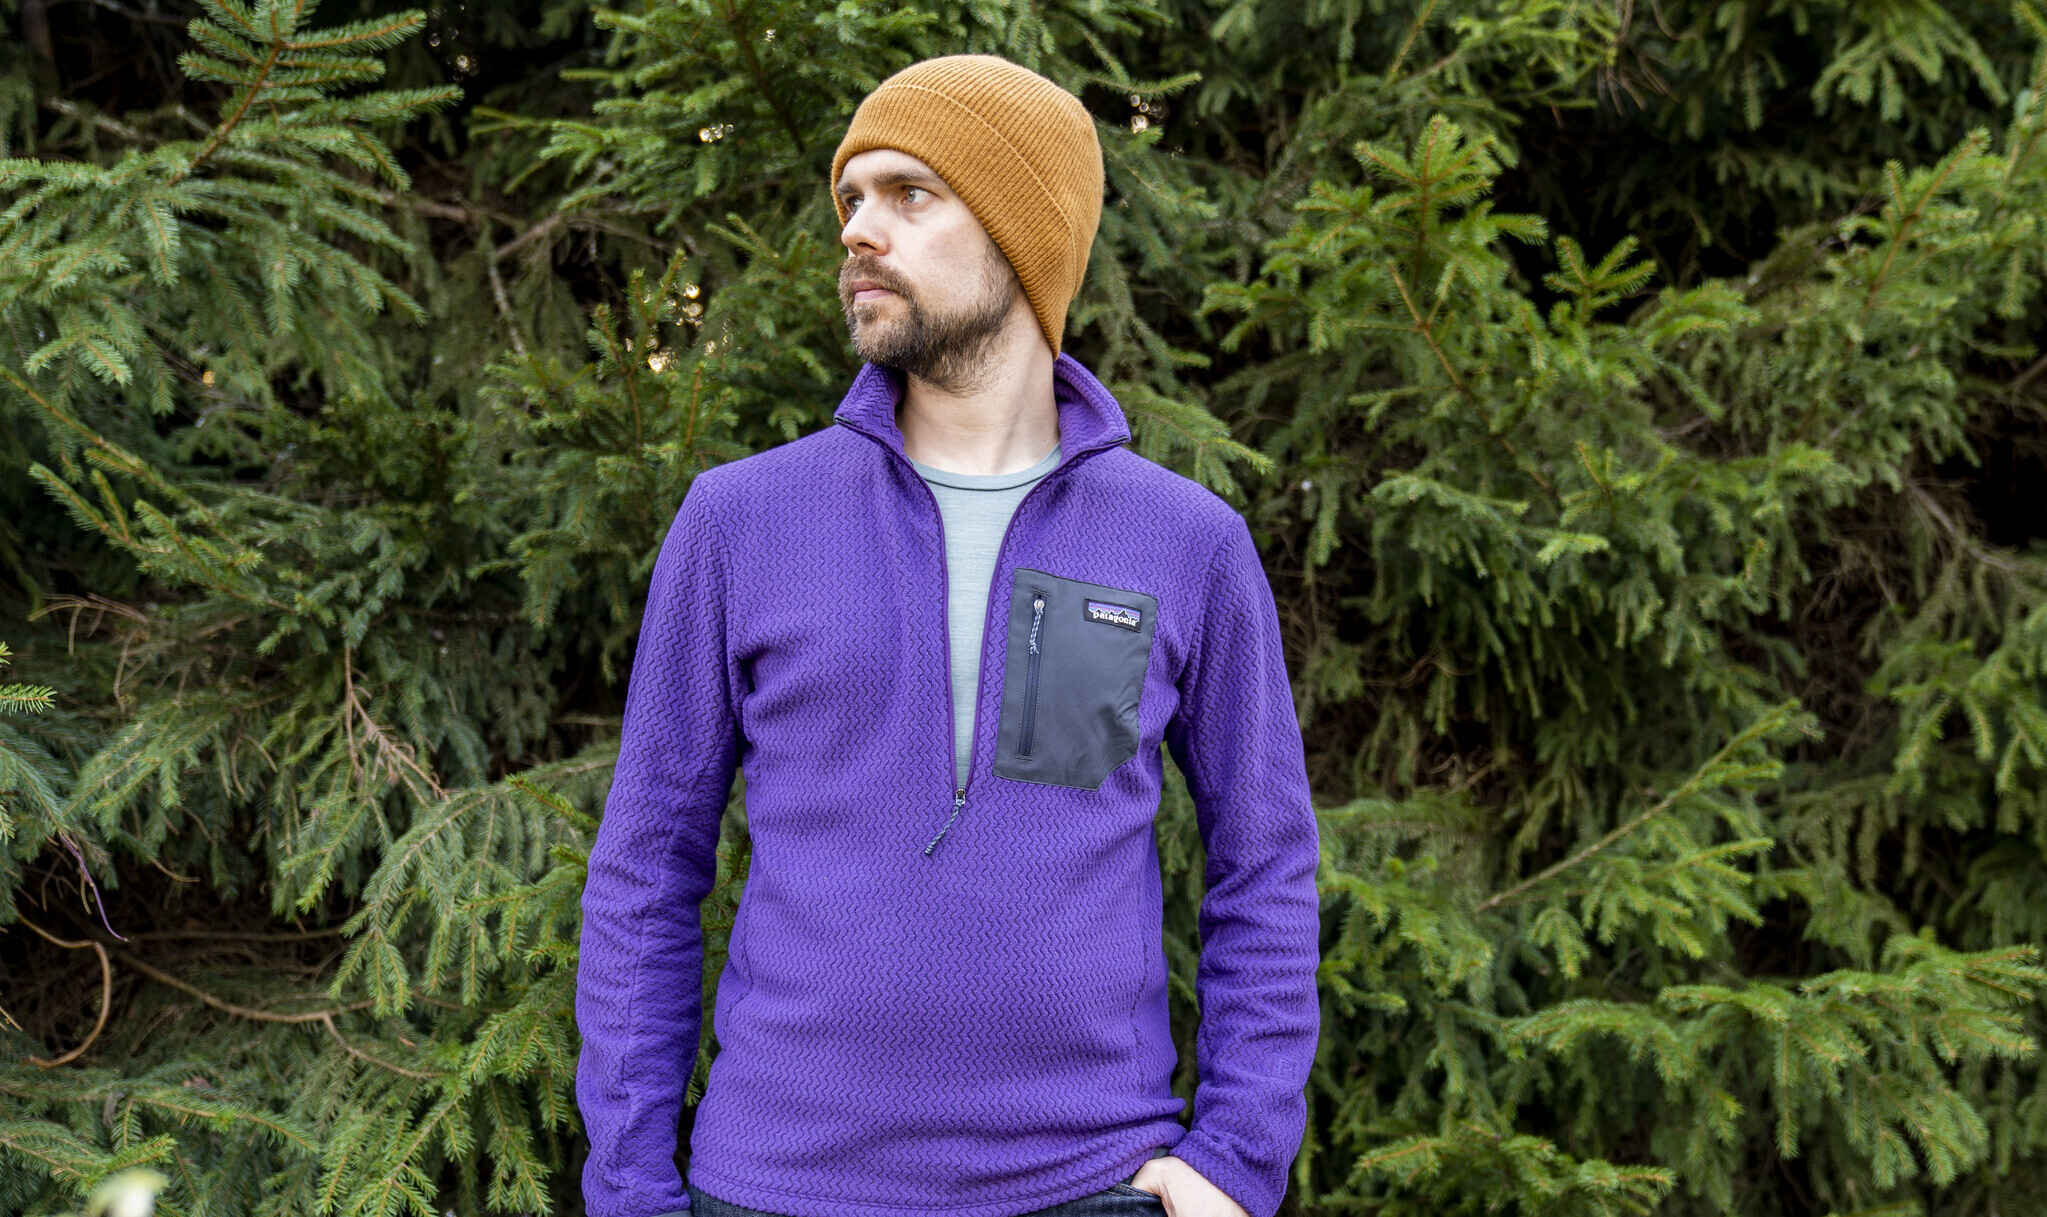 patagonia-r1-air-zip-review-the-best-mid-layer-on-the-market